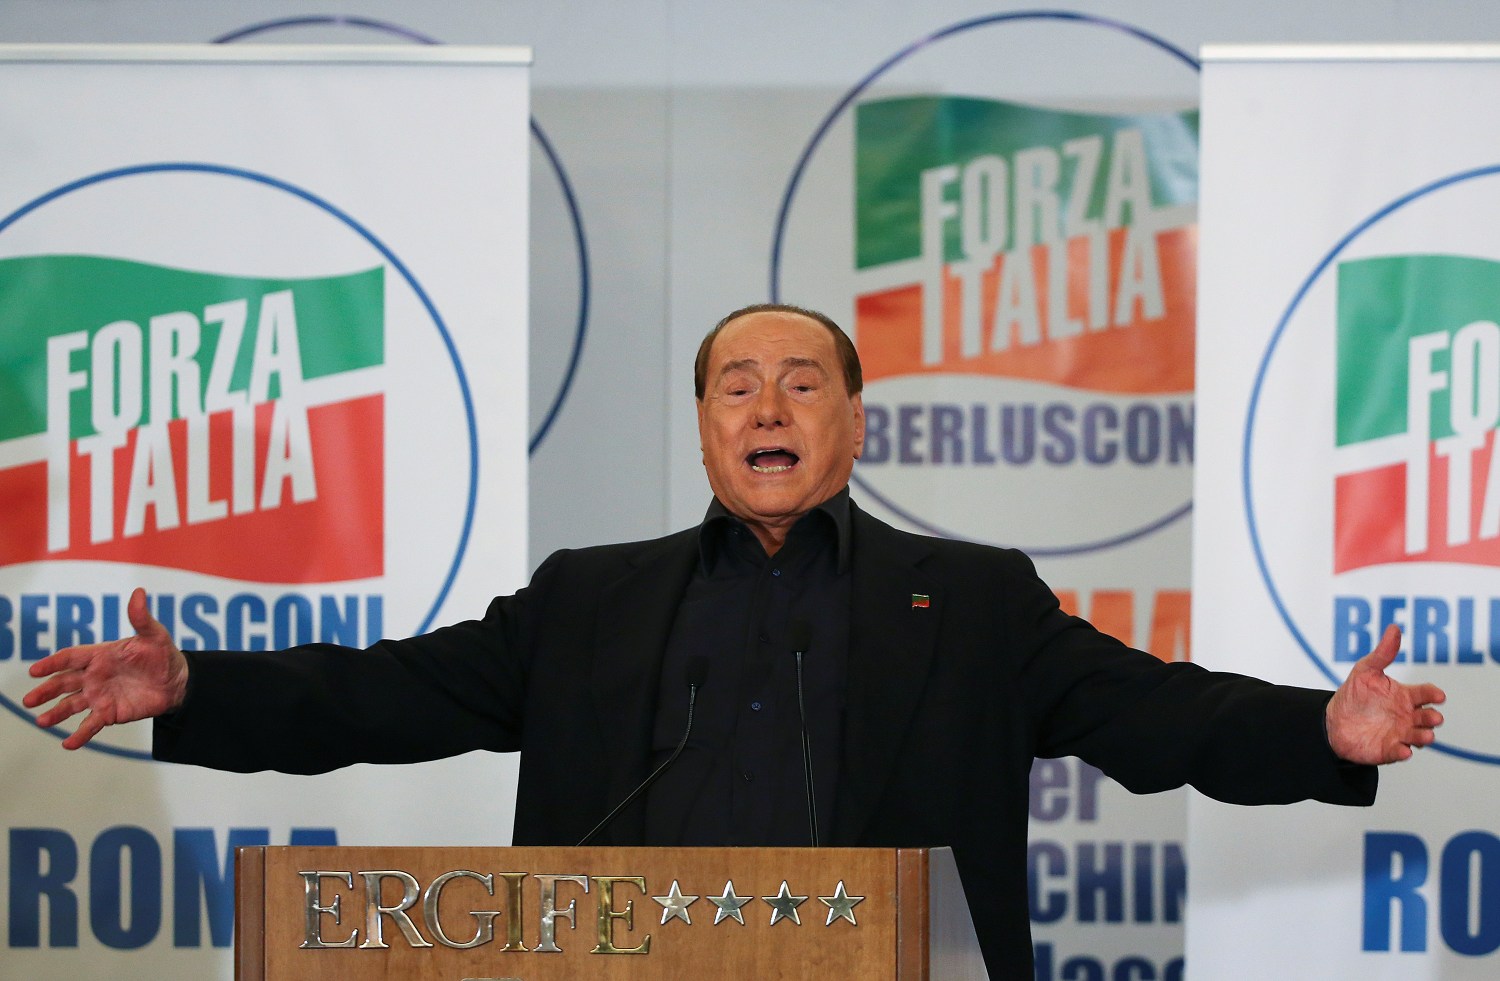 Former Italian prime minister Silvio Berlusconi gestures as he makes his speech during a presentation of Rome's mayoral candidate Alfio Marchini (not seen) in Rome, Italy May 10, 2016 REUTERS/Alessandro Bianchi TPX IMAGES OF THE DAY - RTX2DP3I